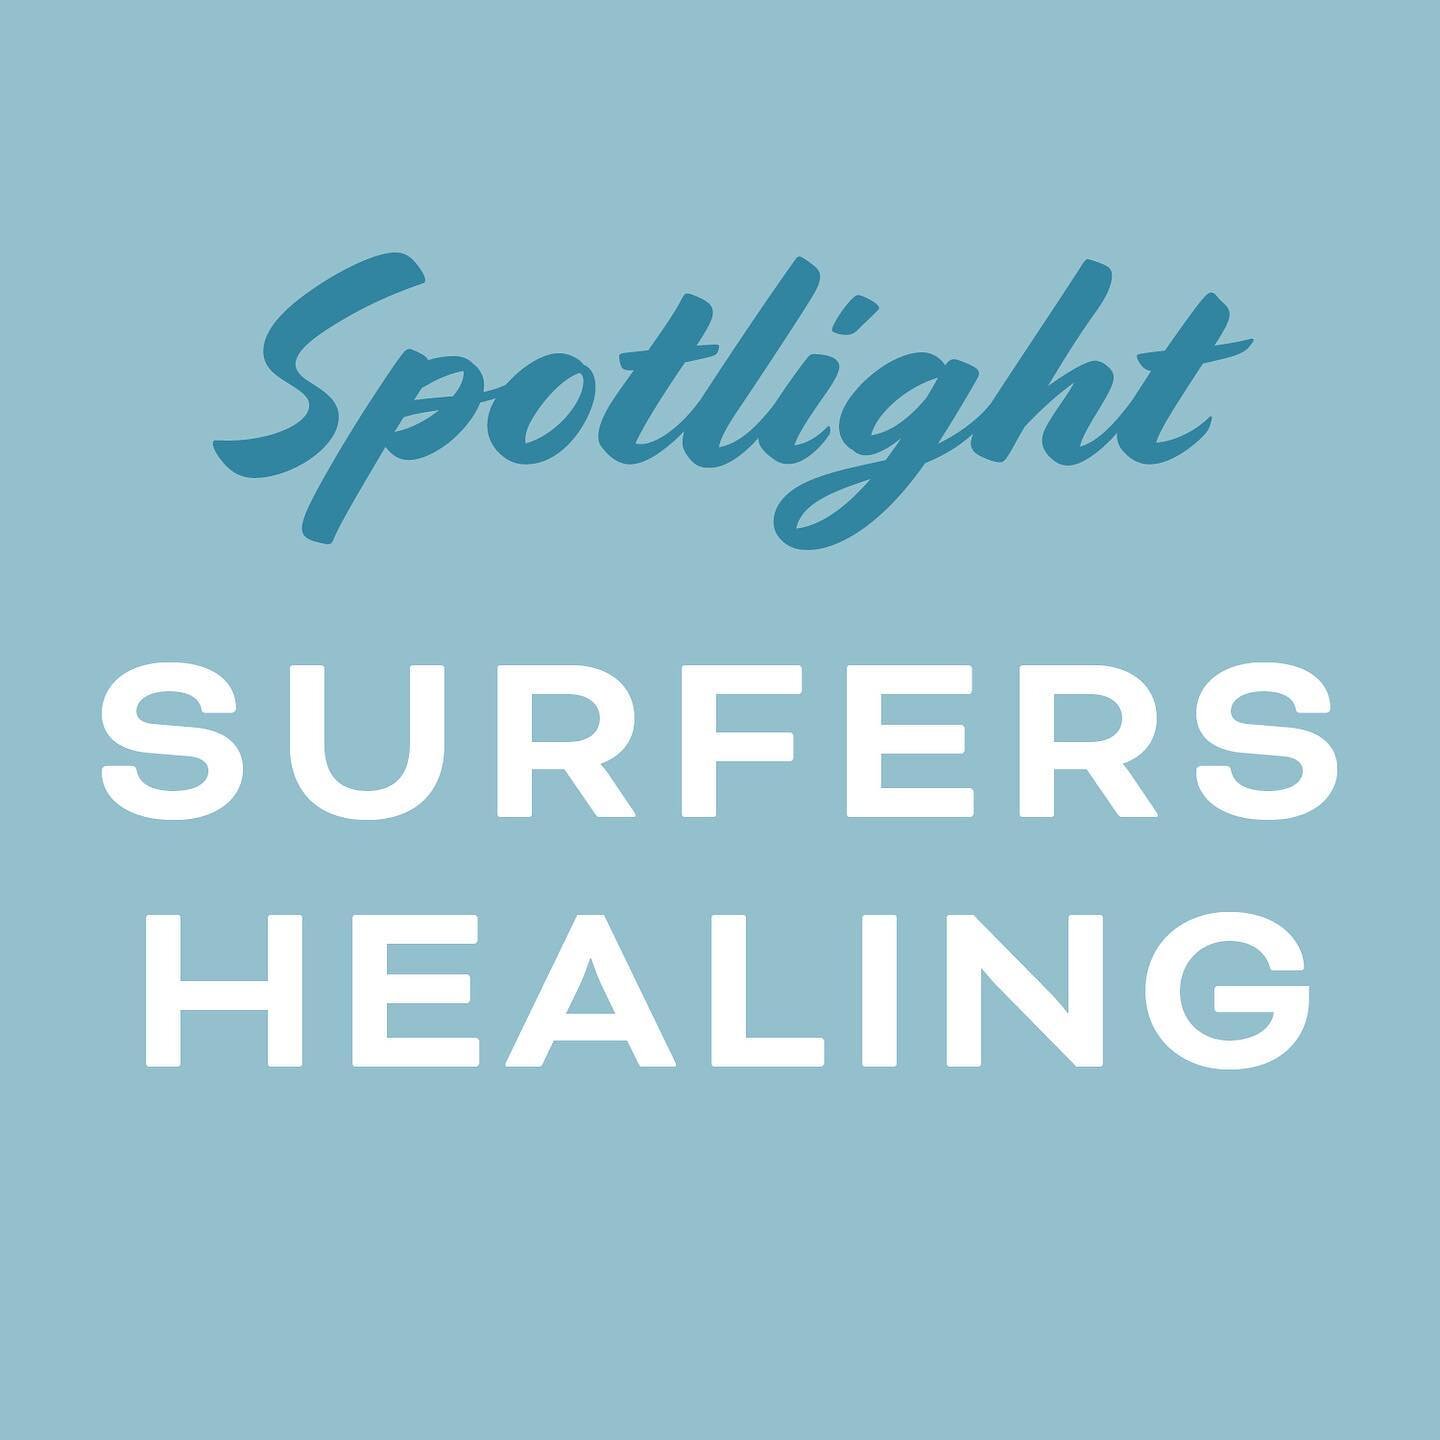 Once a month we&rsquo;ll be spotlighting a local charity and sharing a little about how they got started and what we as a community can do to help.

This month&rsquo;s spotlight:
SURFERS HEALING

Surfers Healing was founded by former pro surfer Izzy 